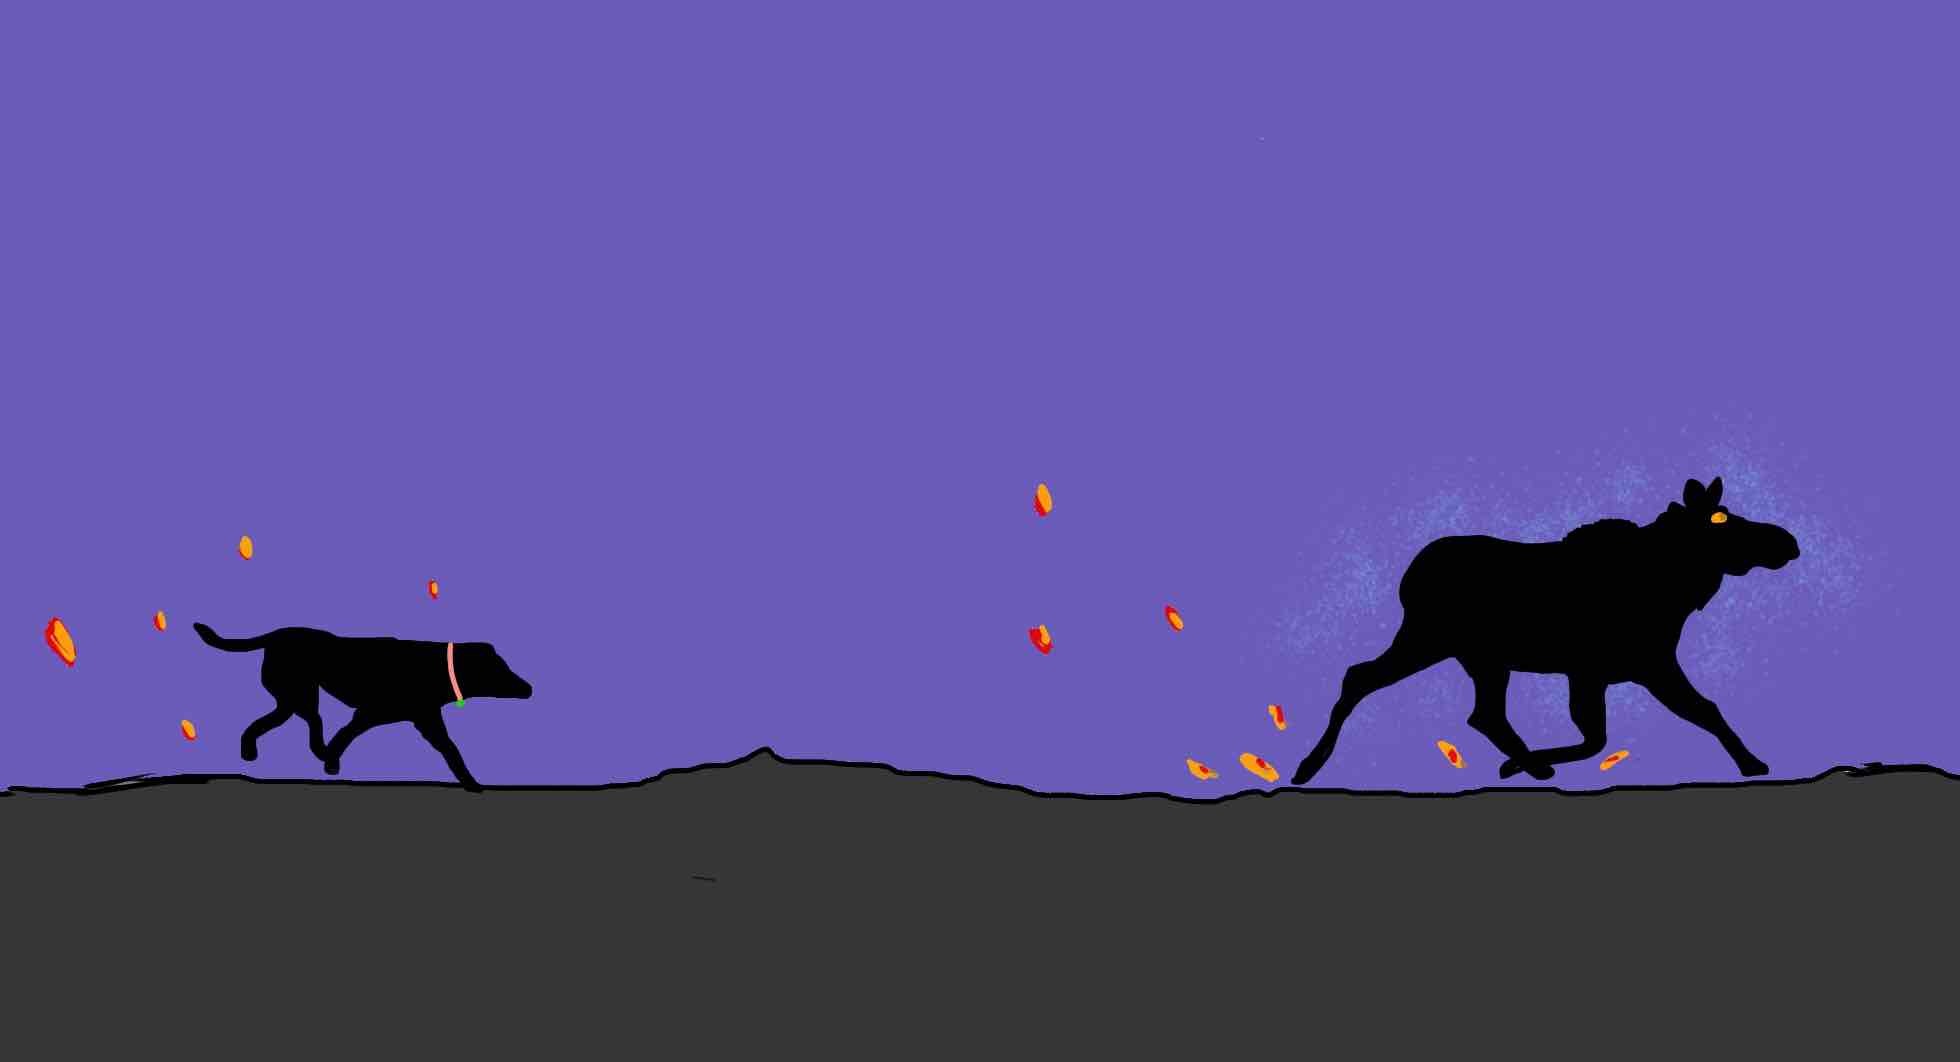 Drawing of Didi dog chasing a ghostly silhouette of a moose, with sparks flying